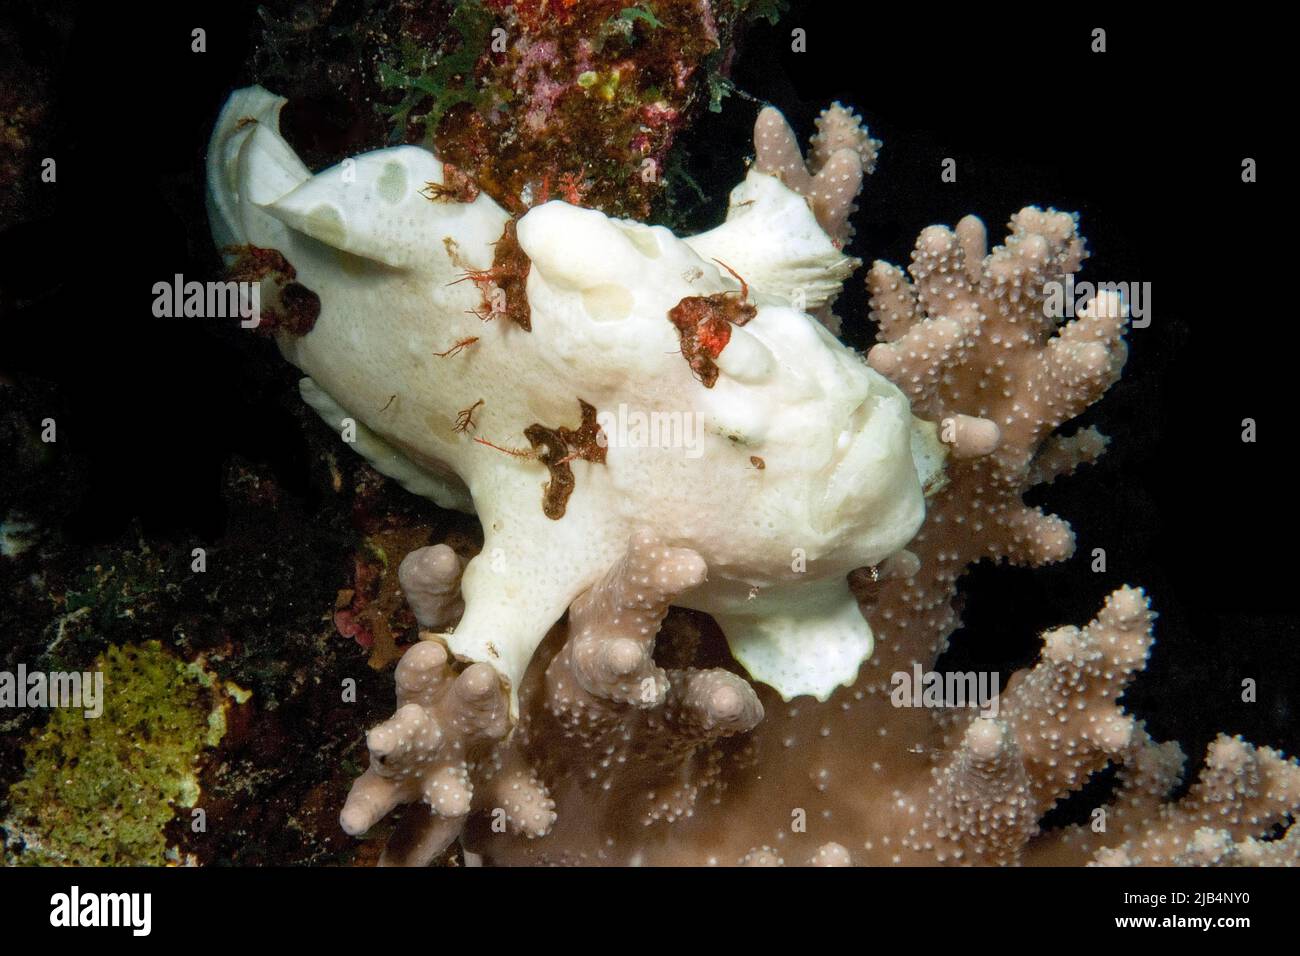 Juvenile painted frogfish (Antennarius pictus) leaning on Agropora stony corals (Agroporidae), Pacific Ocean, Philippine Sea, Philippines Stock Photo